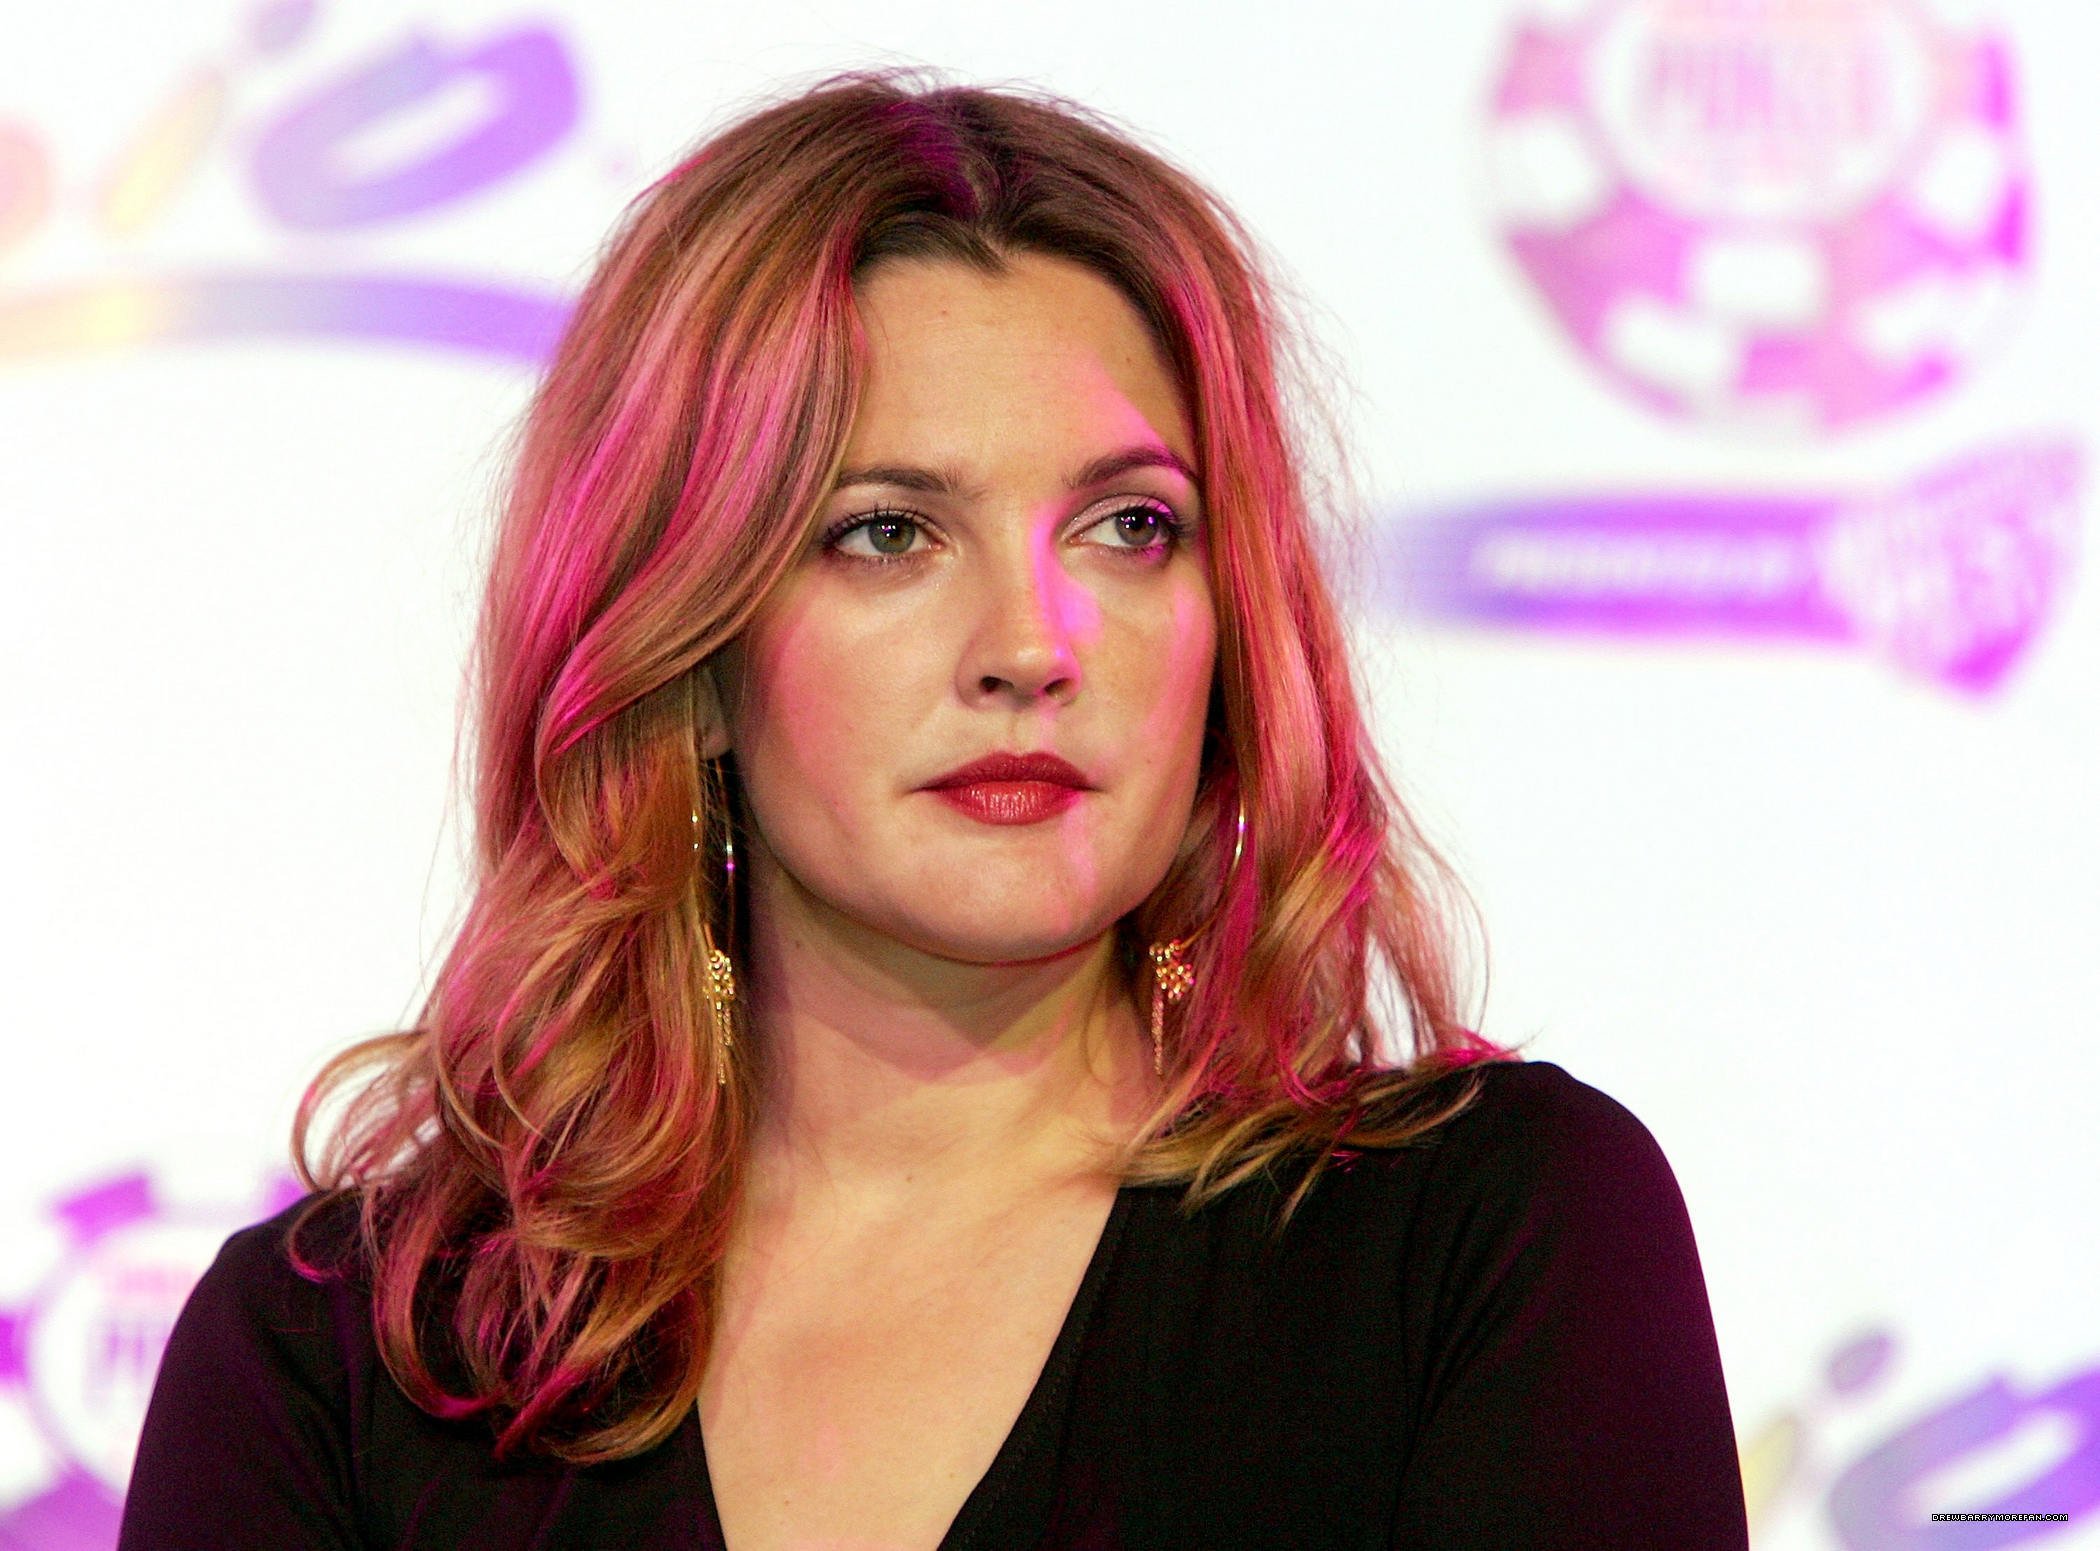 Drew Barrymore actrice et productrice amoureuse ?